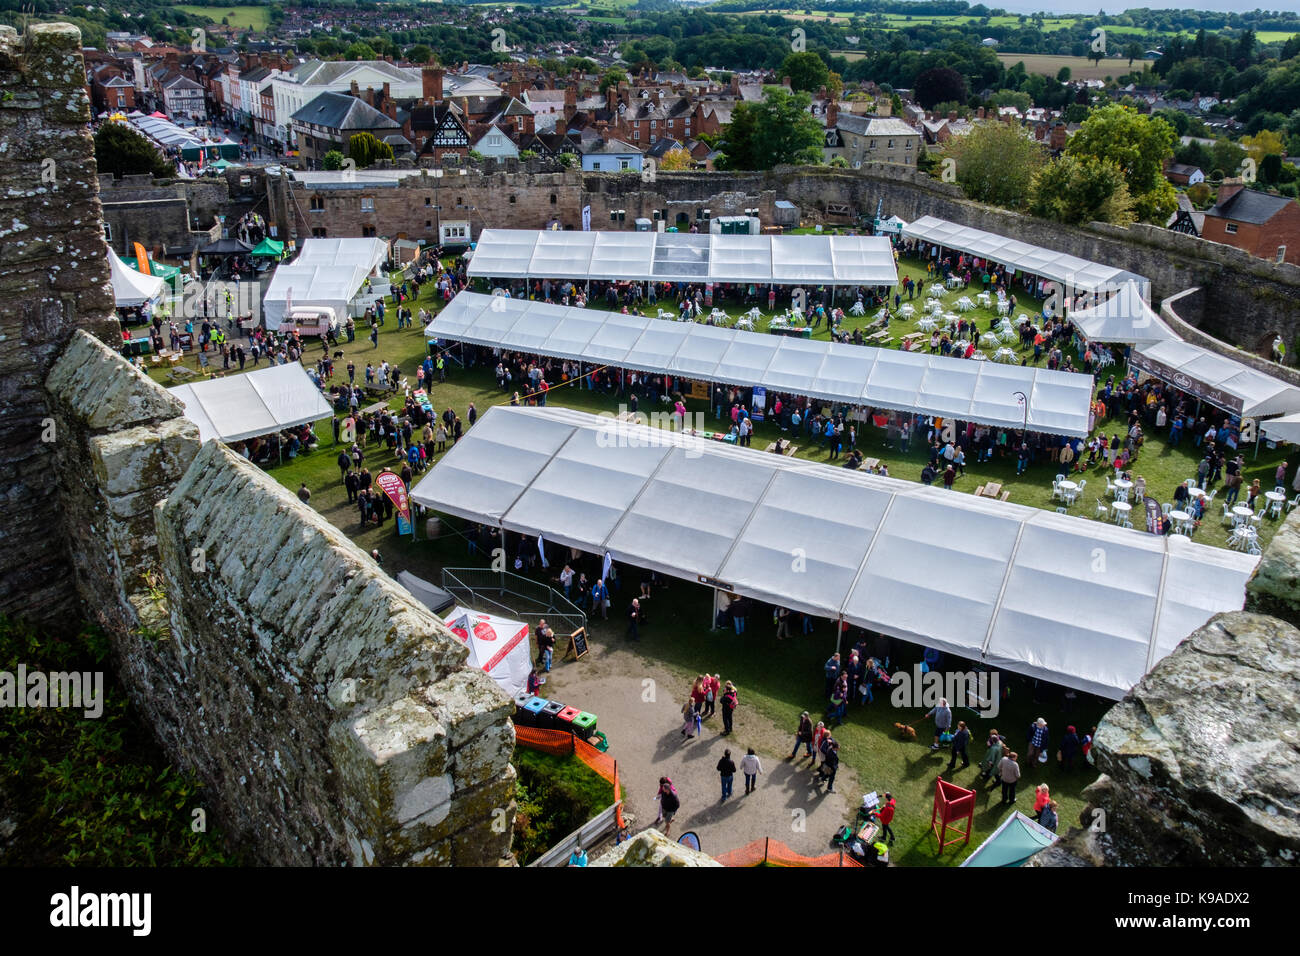 VIsitors at the 2017 Ludlow Food Festival, Ludlow, Shropshire, UK Stock Photo